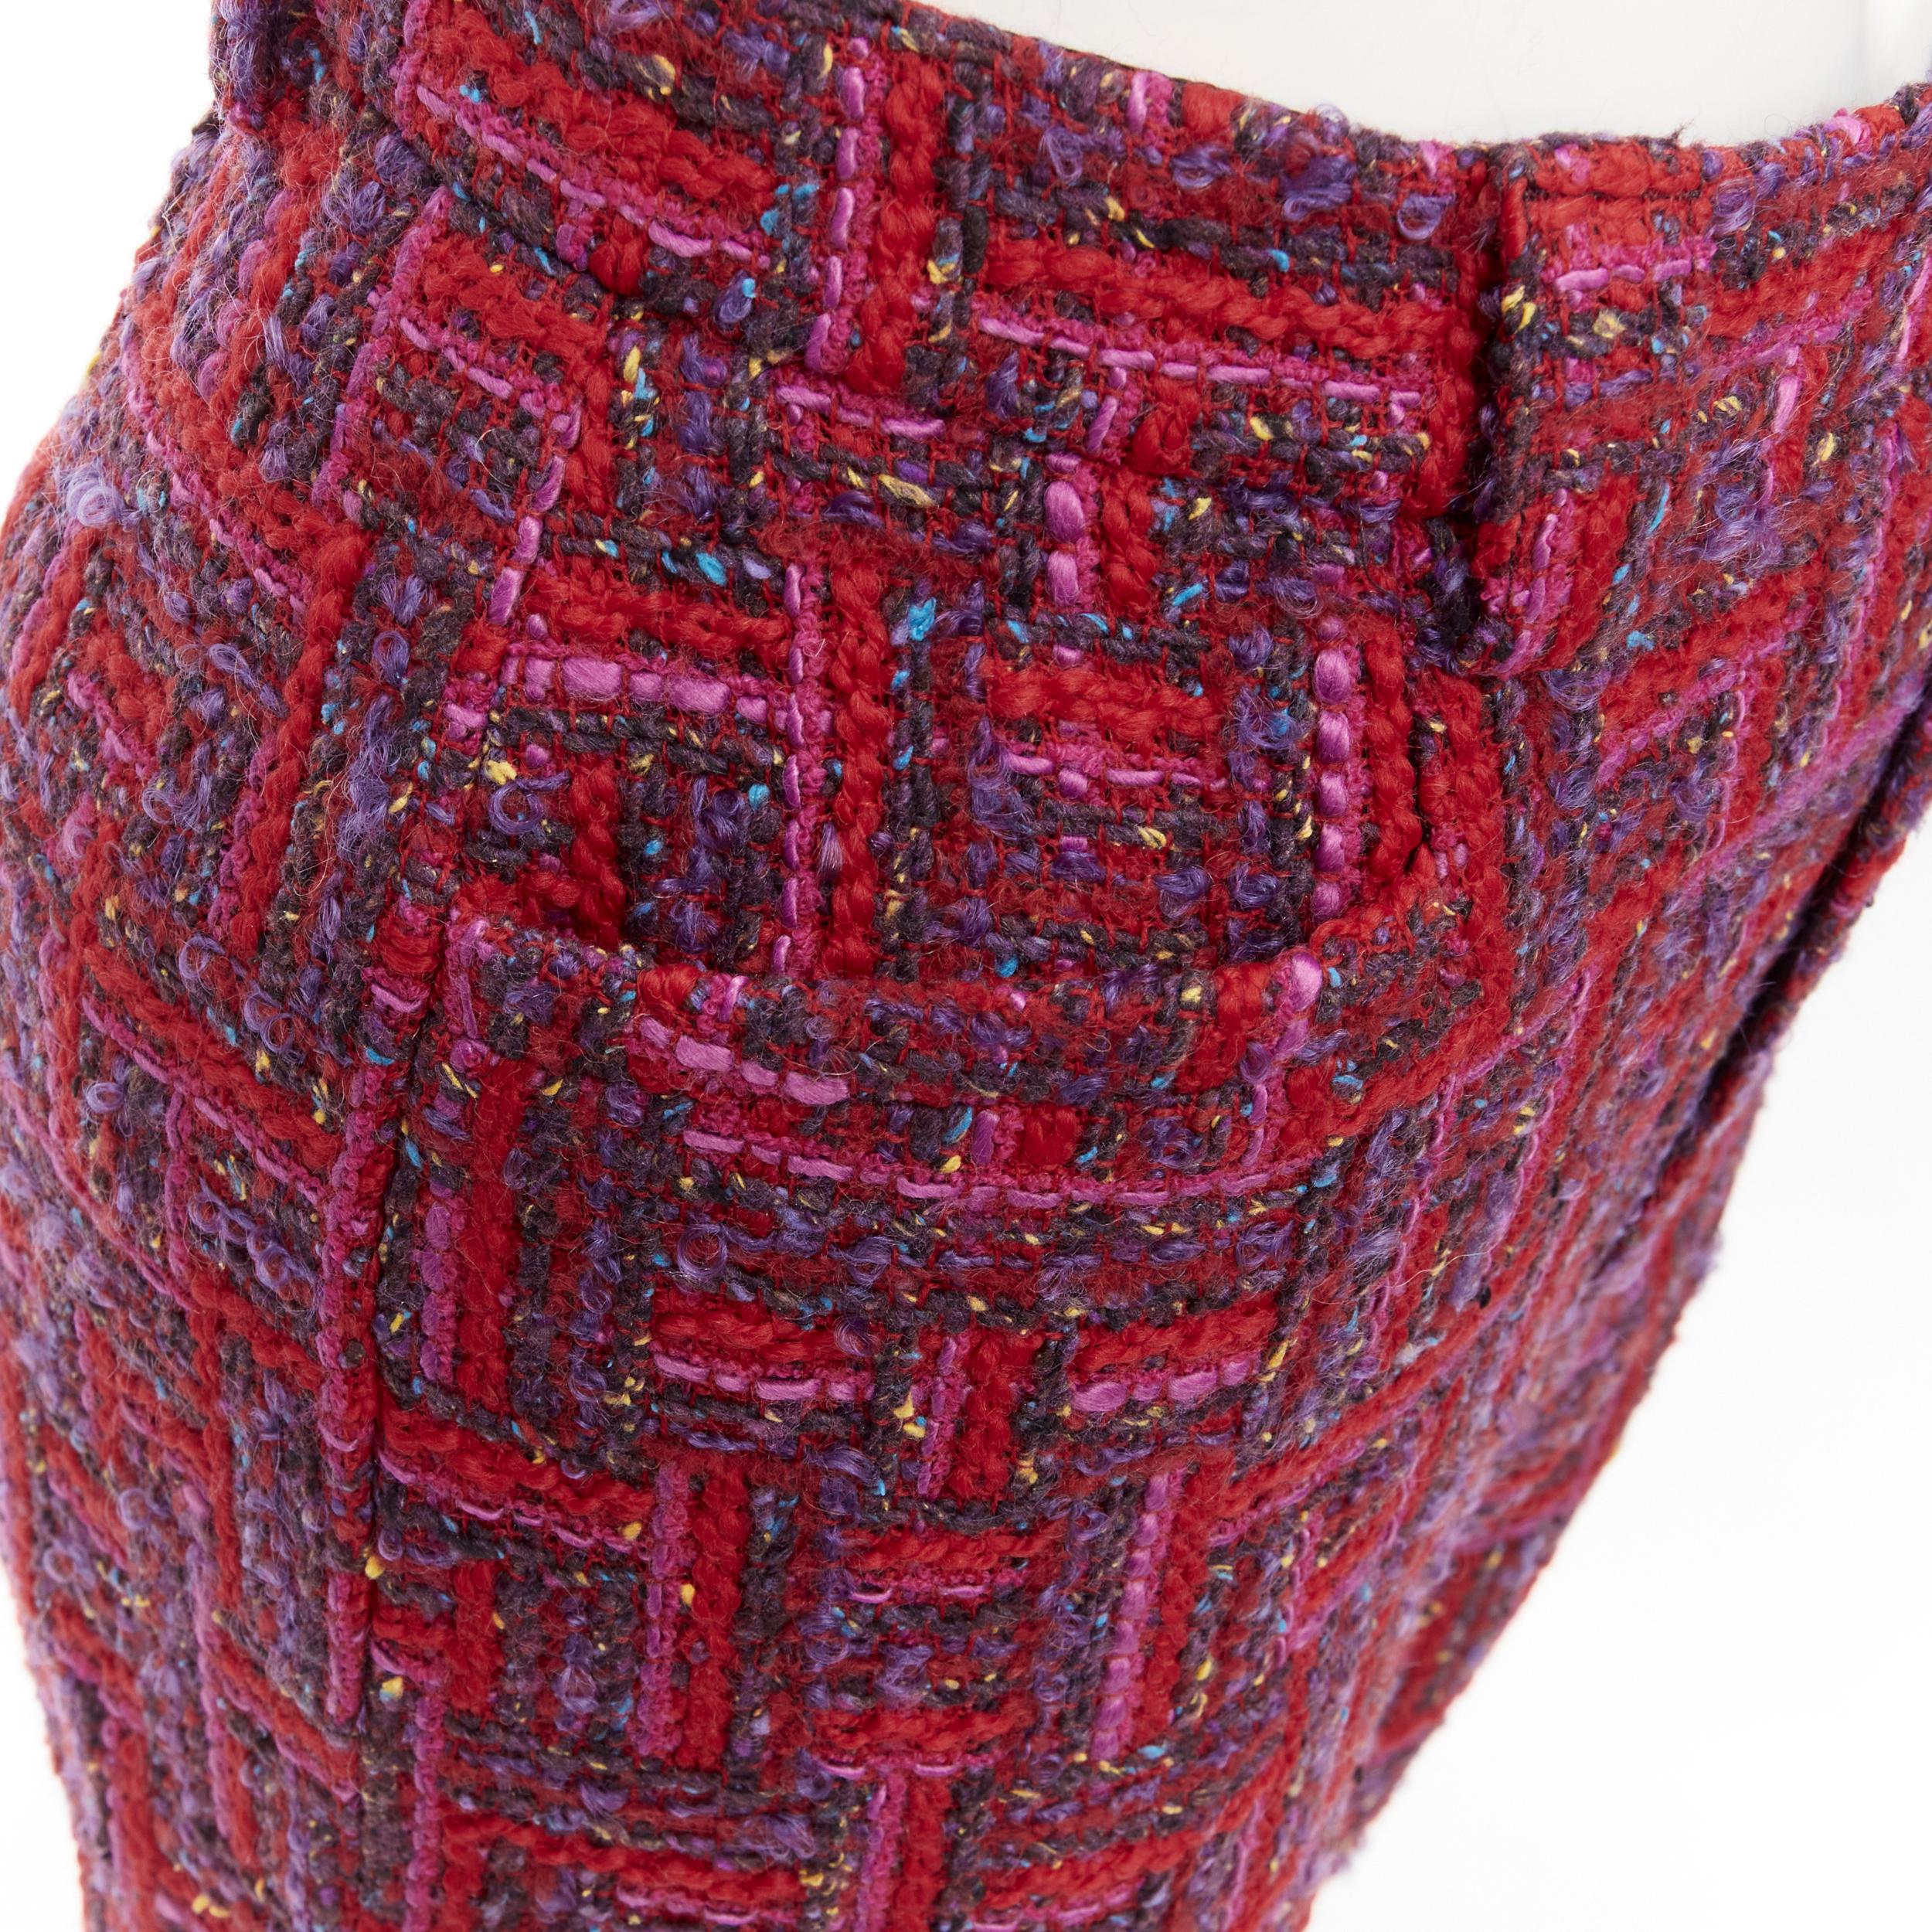 SAINT LAURENT 2021 pink red geometric tweed knee length shorts FR34 XS
Brand: Saint Laurent
Designer: Anthony Vaccarello
Collection: 2021 Runway
Material: Tweed
Color: Purple
Pattern: Geometric
Closure: Zip Fly
Extra Detail: Concealed hook bar zip